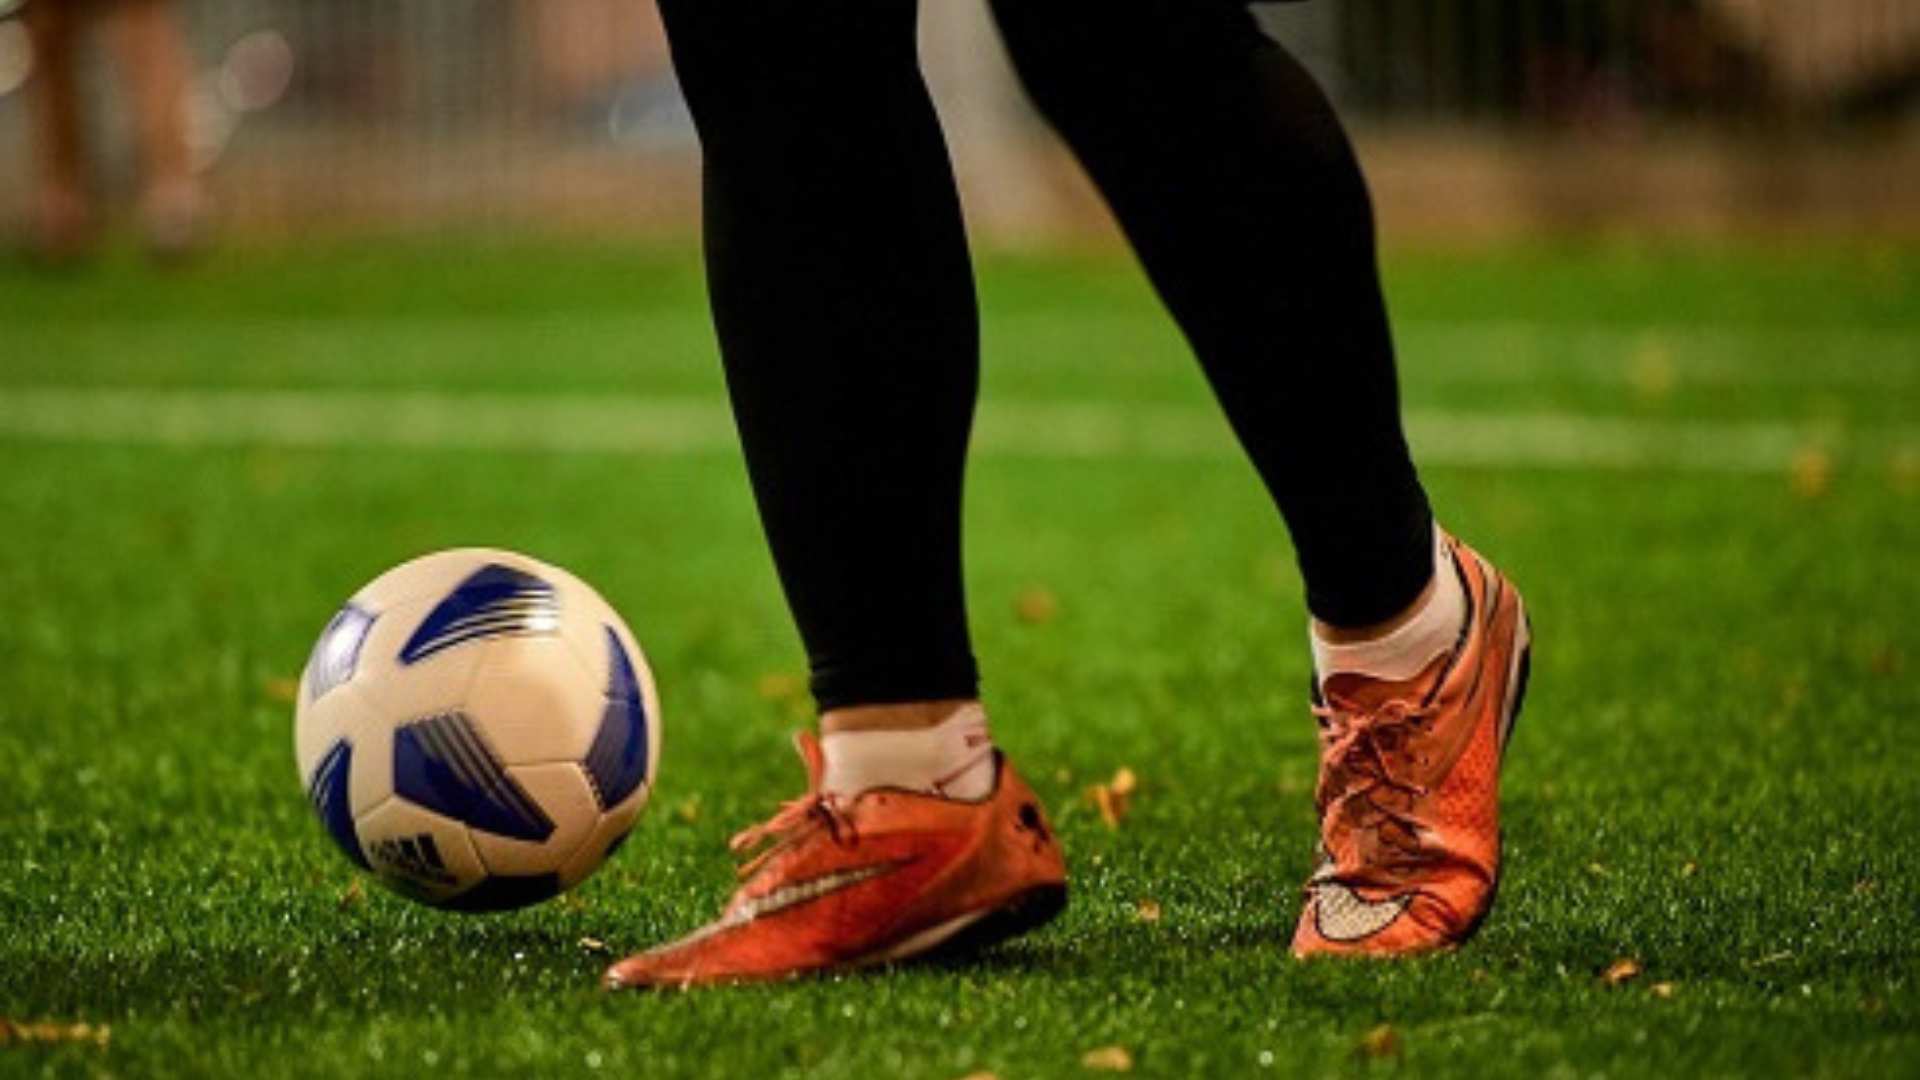 Pronated Footprint: Analysis of Podiatry in Soccer